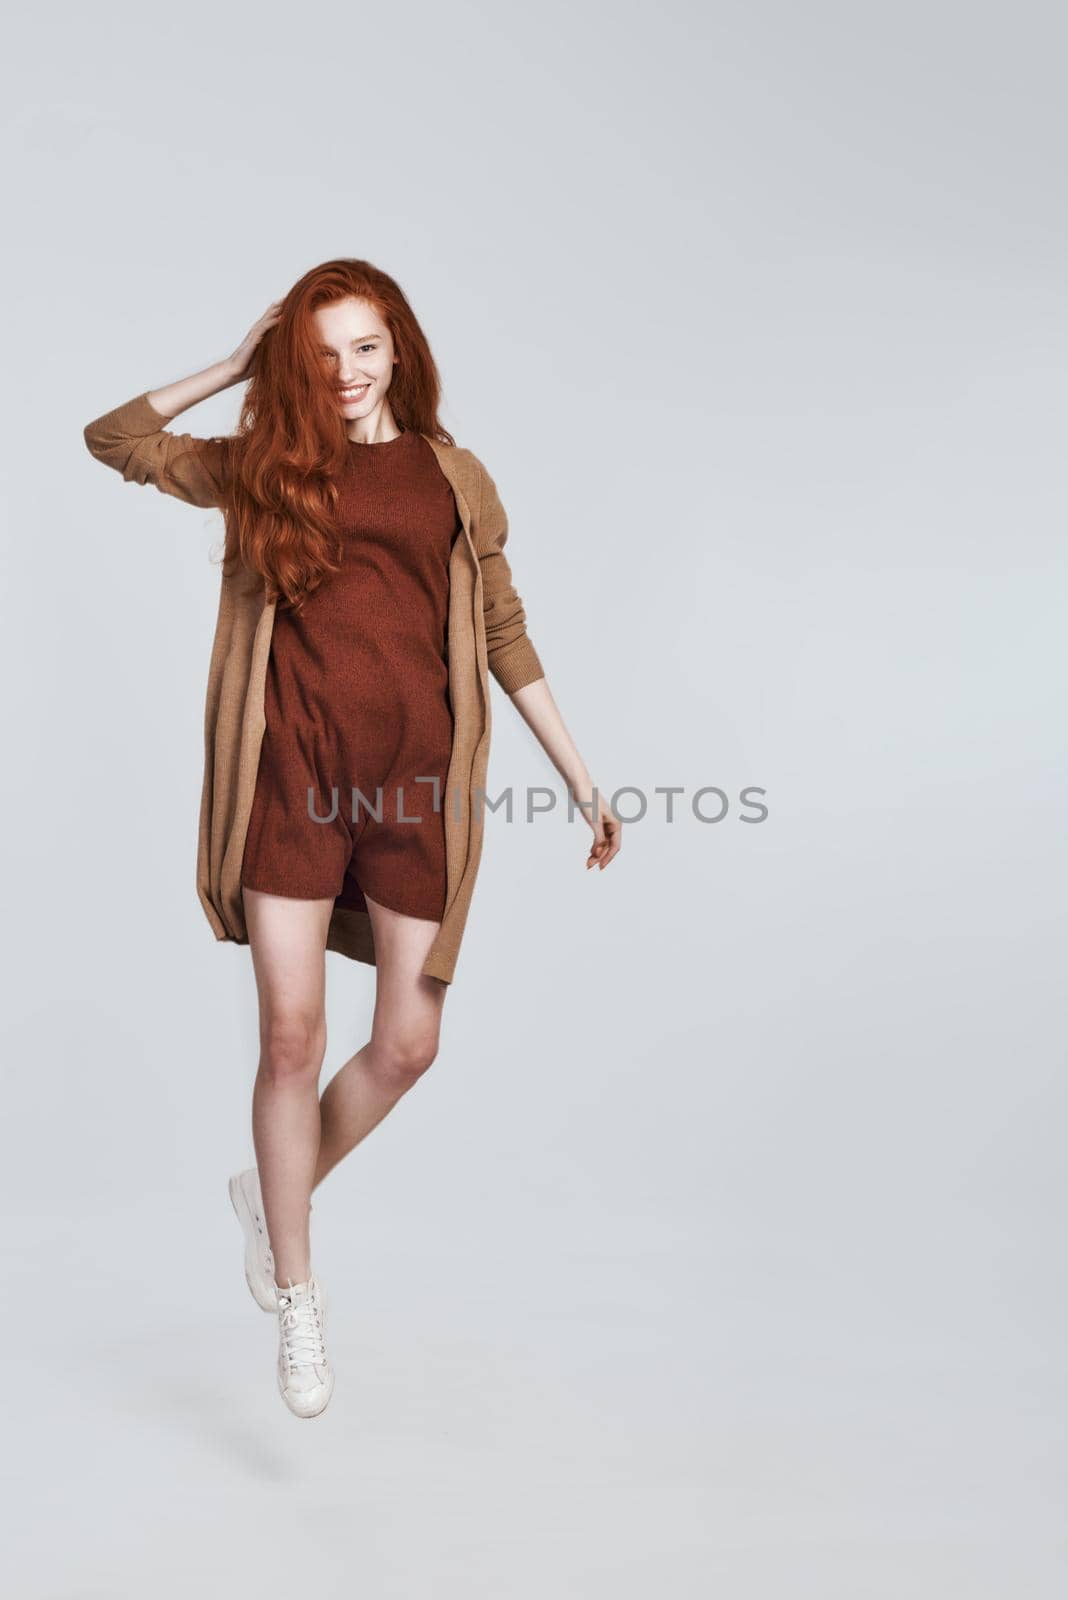 Playfulness. Full length of playful young woman with tousled red hair smiling while jumping against grey background by friendsstock